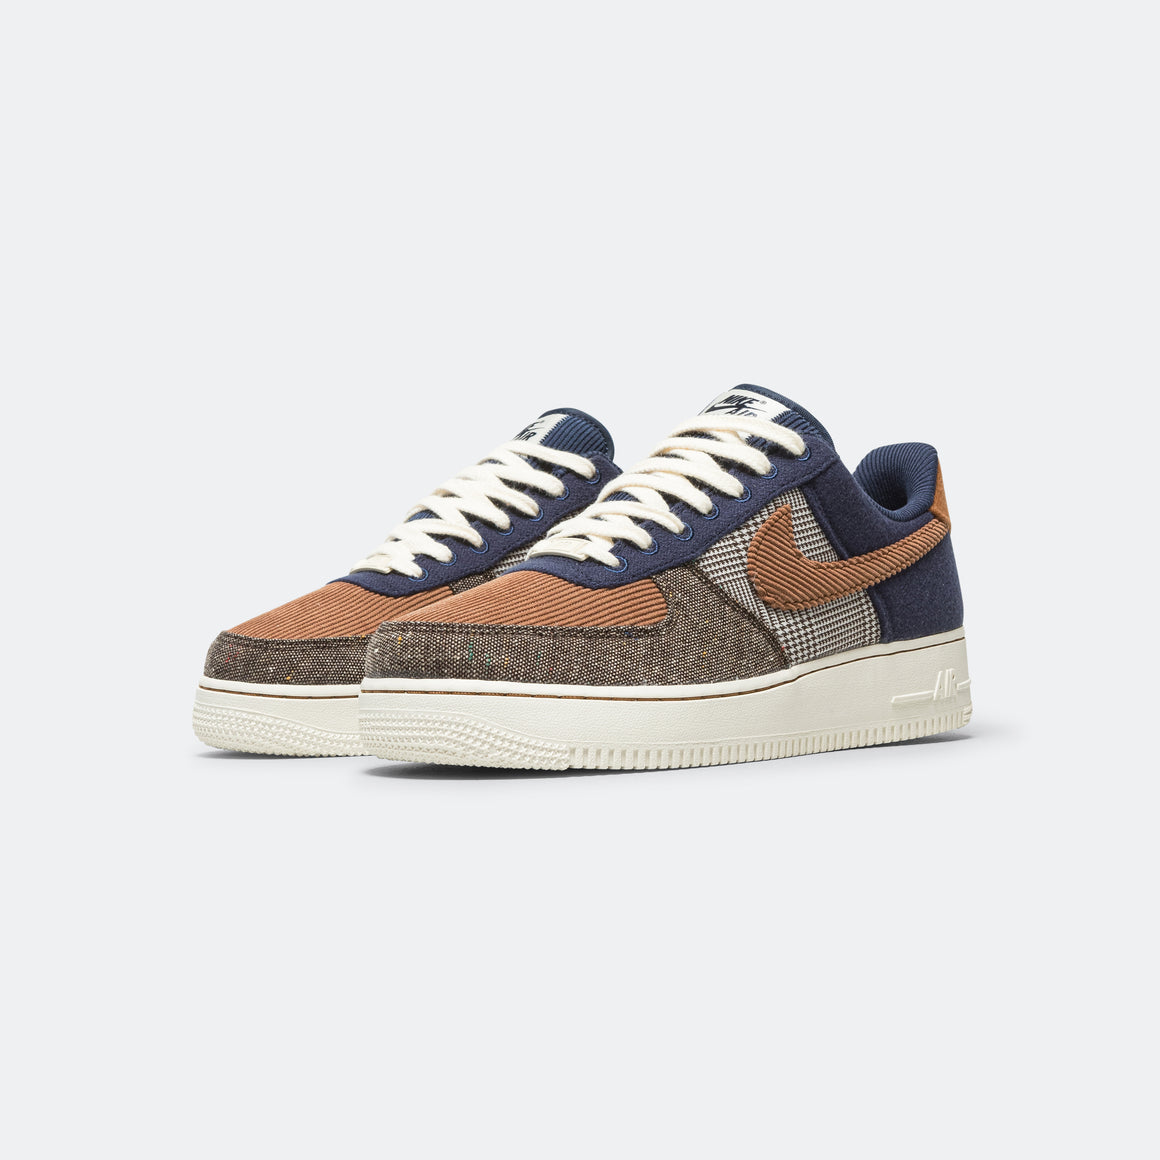 Air Force 1 '07 PRM - Midnight Navy/Ale Brown-Pale Ivory